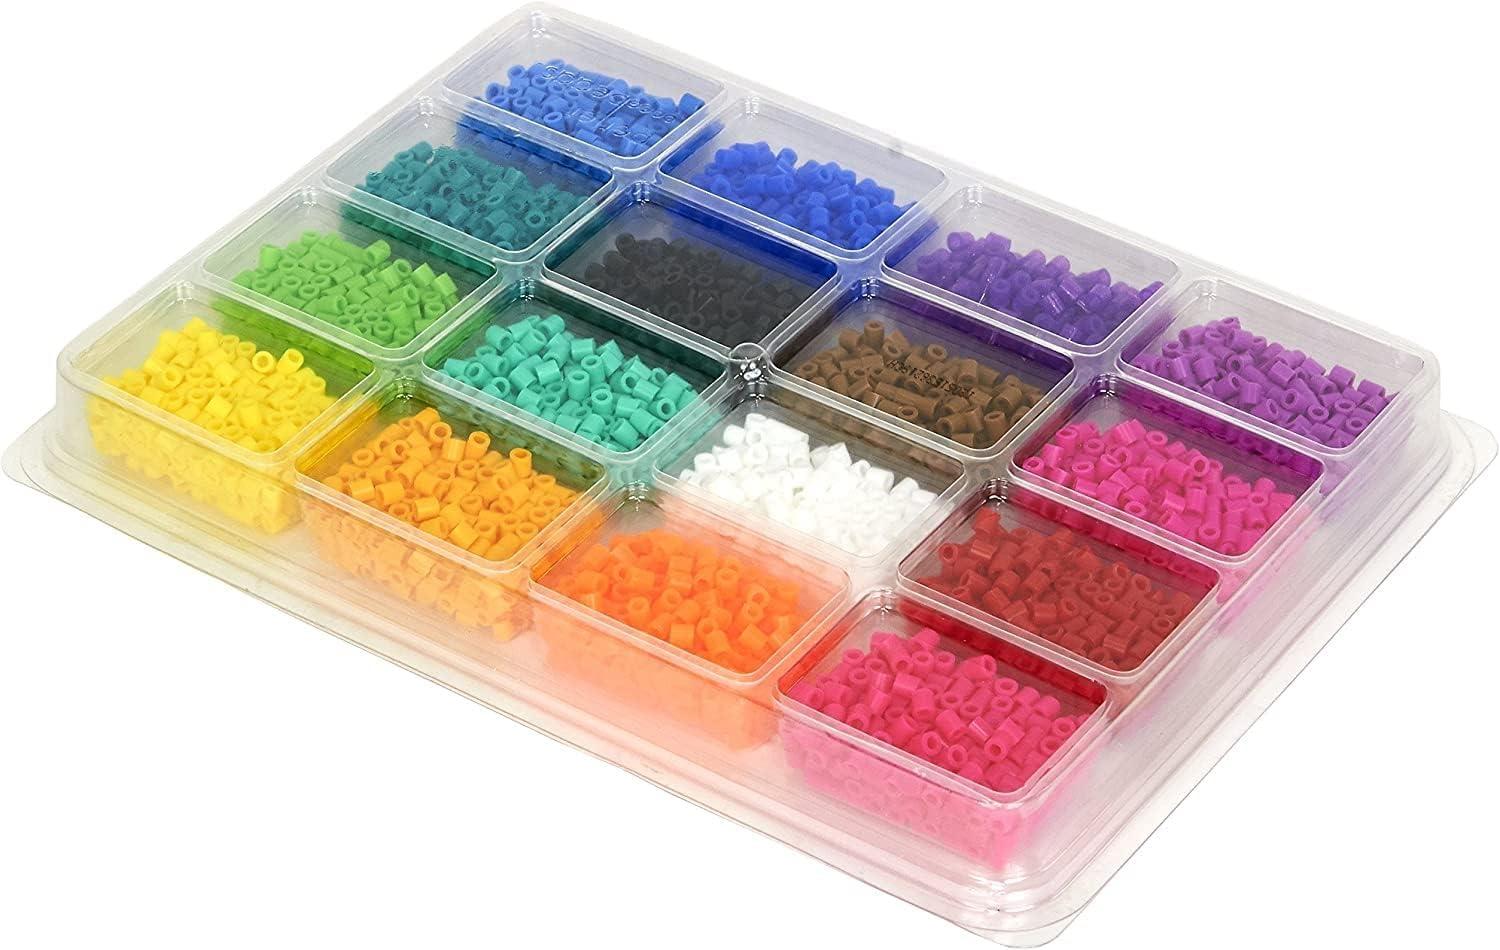 Perler 17605 Assorted Fuse Beads Kit with Storage Tray and Pattern Book for  Arts and Crafts, Multicolor, 4001pcs